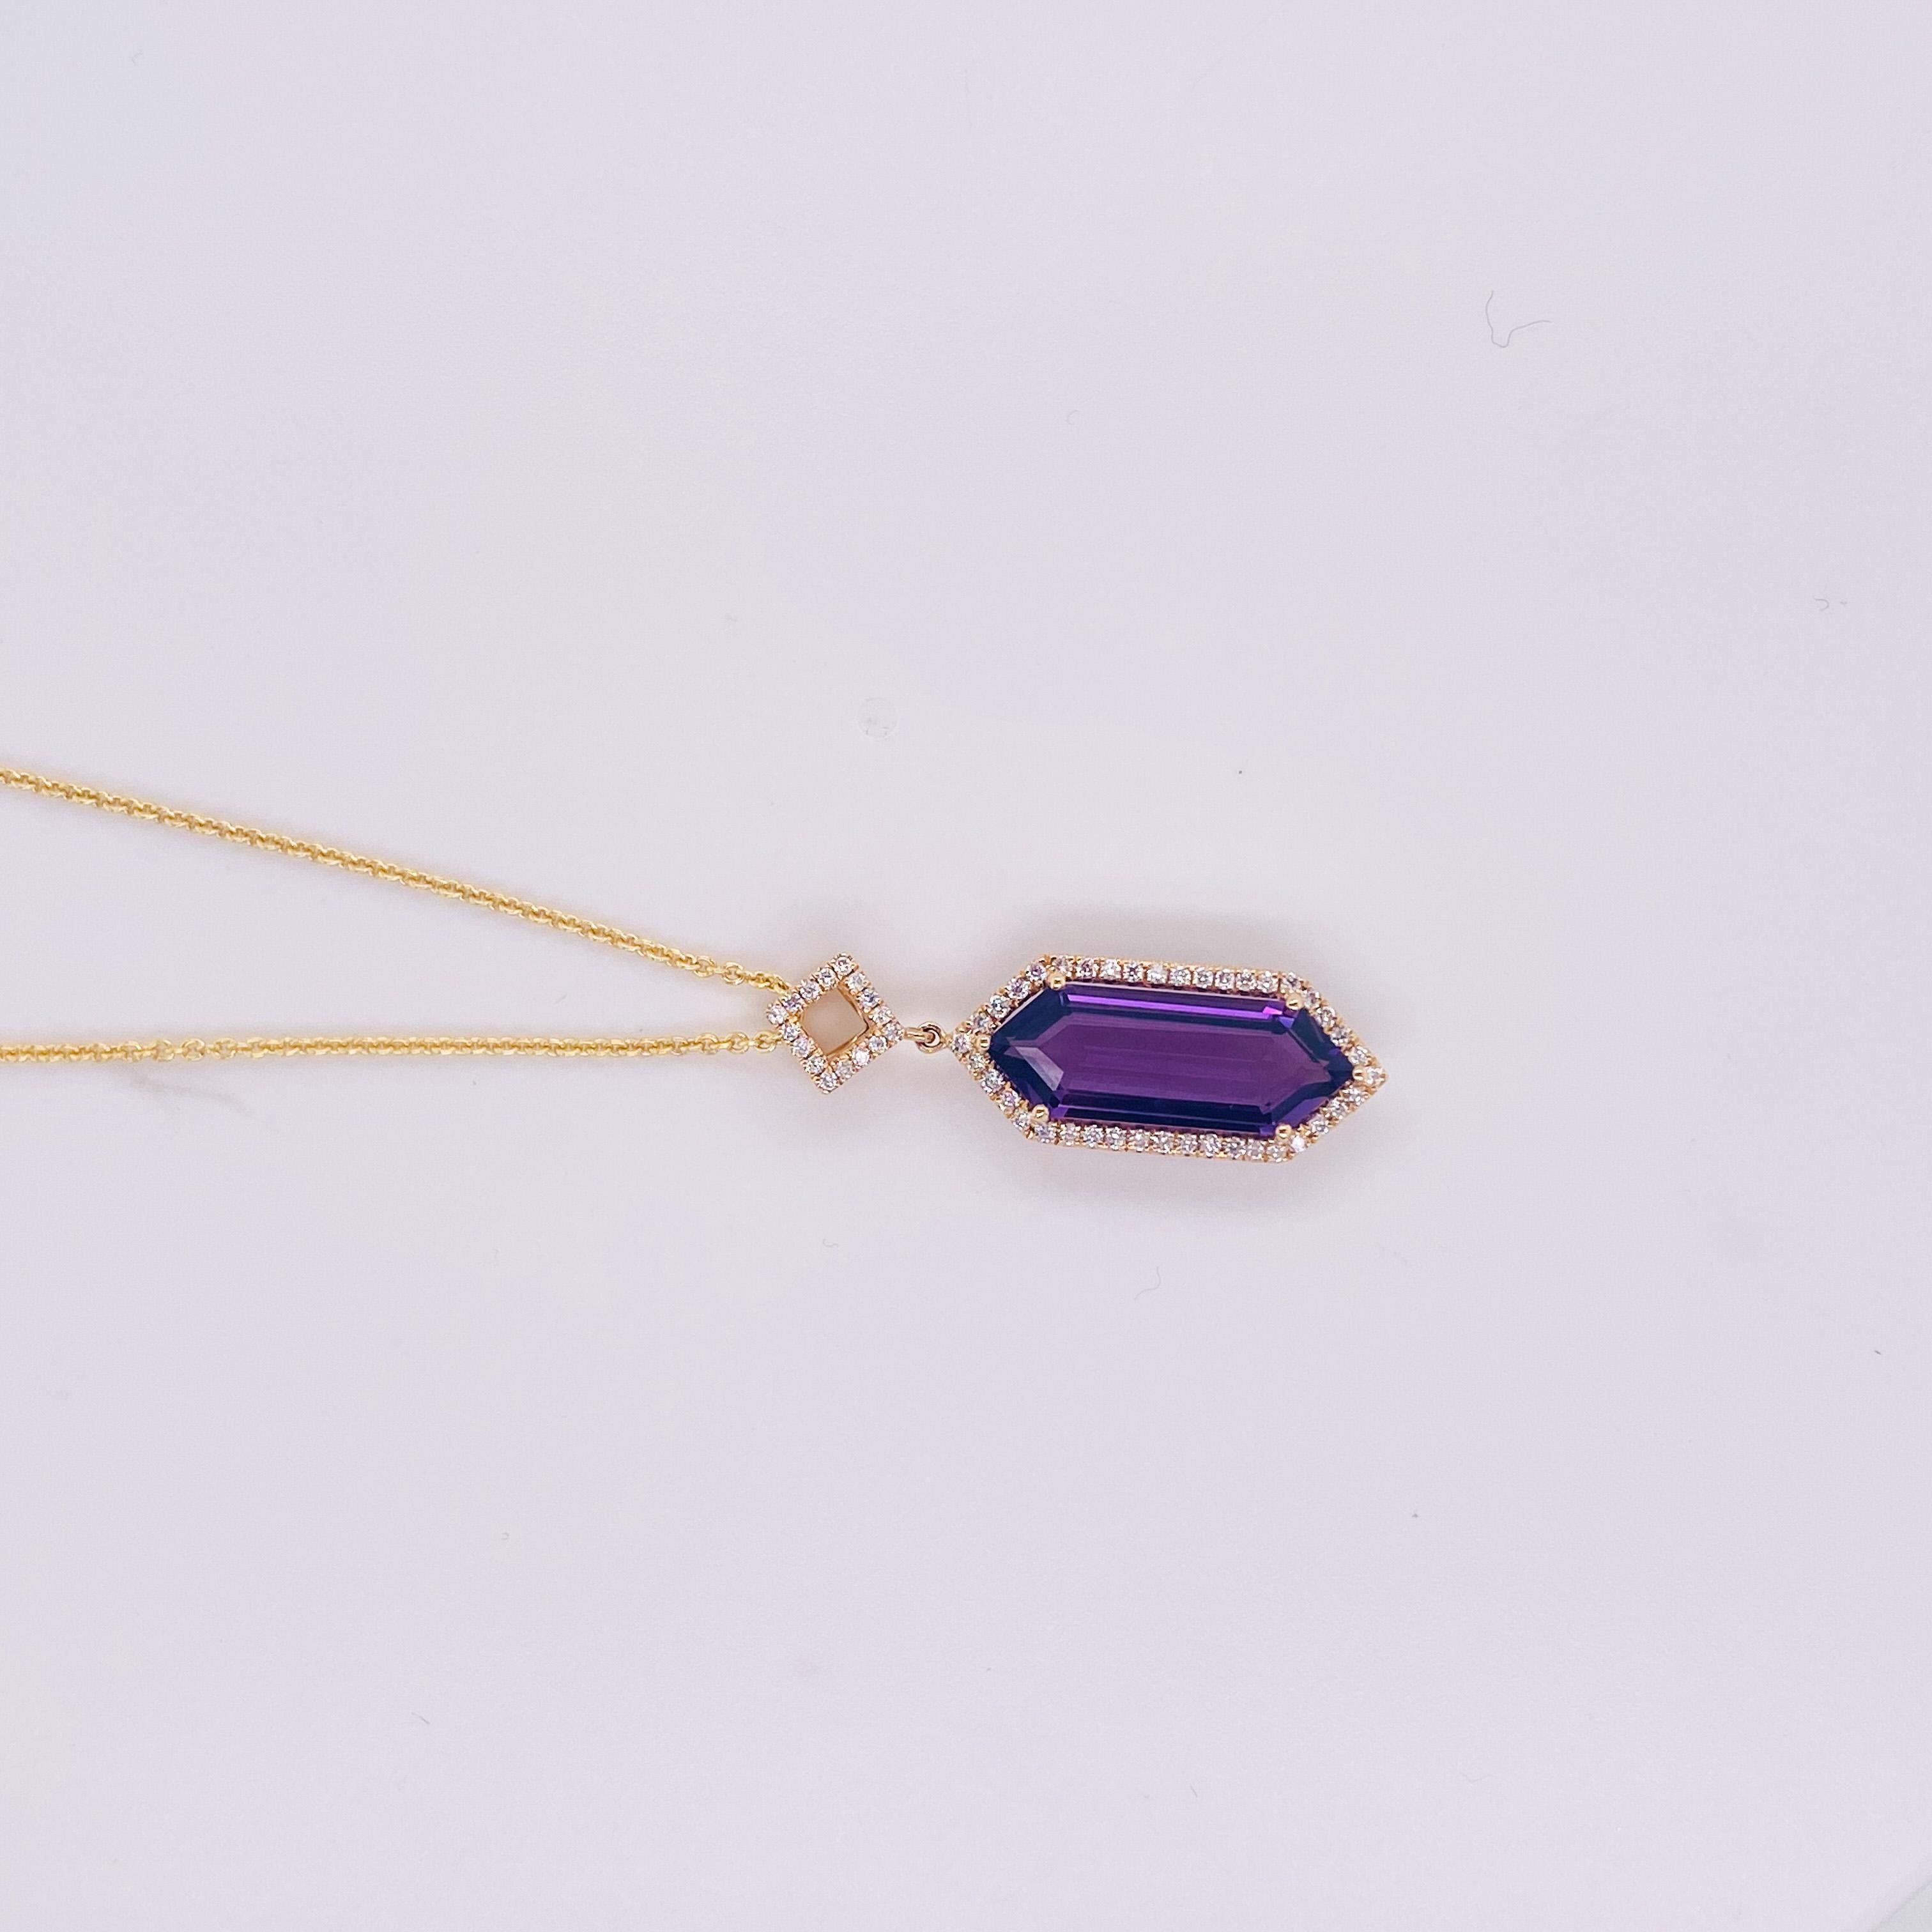 Hexagonal is an unusual shape for a gemstone but this amethyst will definitely delight anyone’s taste for unique. The lovely amethyst was cut by an American gemstone artist and was selected for this pendant creation. The pendant hangs from an 18